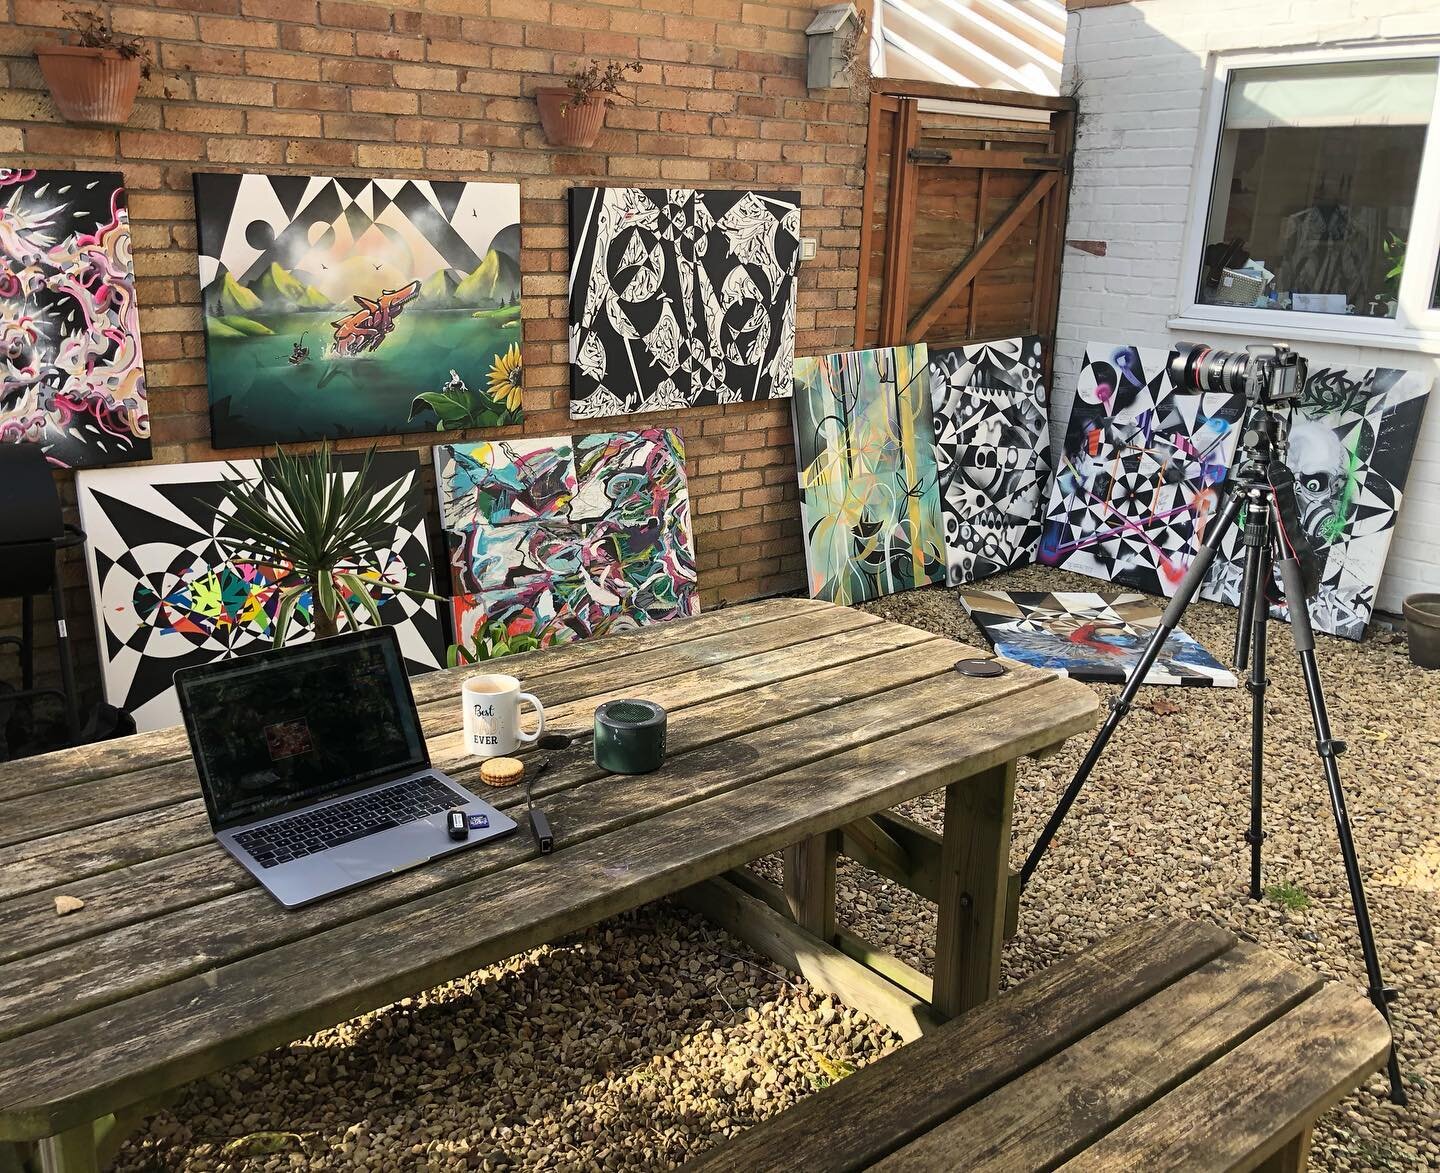 Garden studio FTW! 
Working on a very exciting project that I&rsquo;ve been dreaming up for a while... time to bring together a years worth of Lockdown Collaborations 🙏🏼